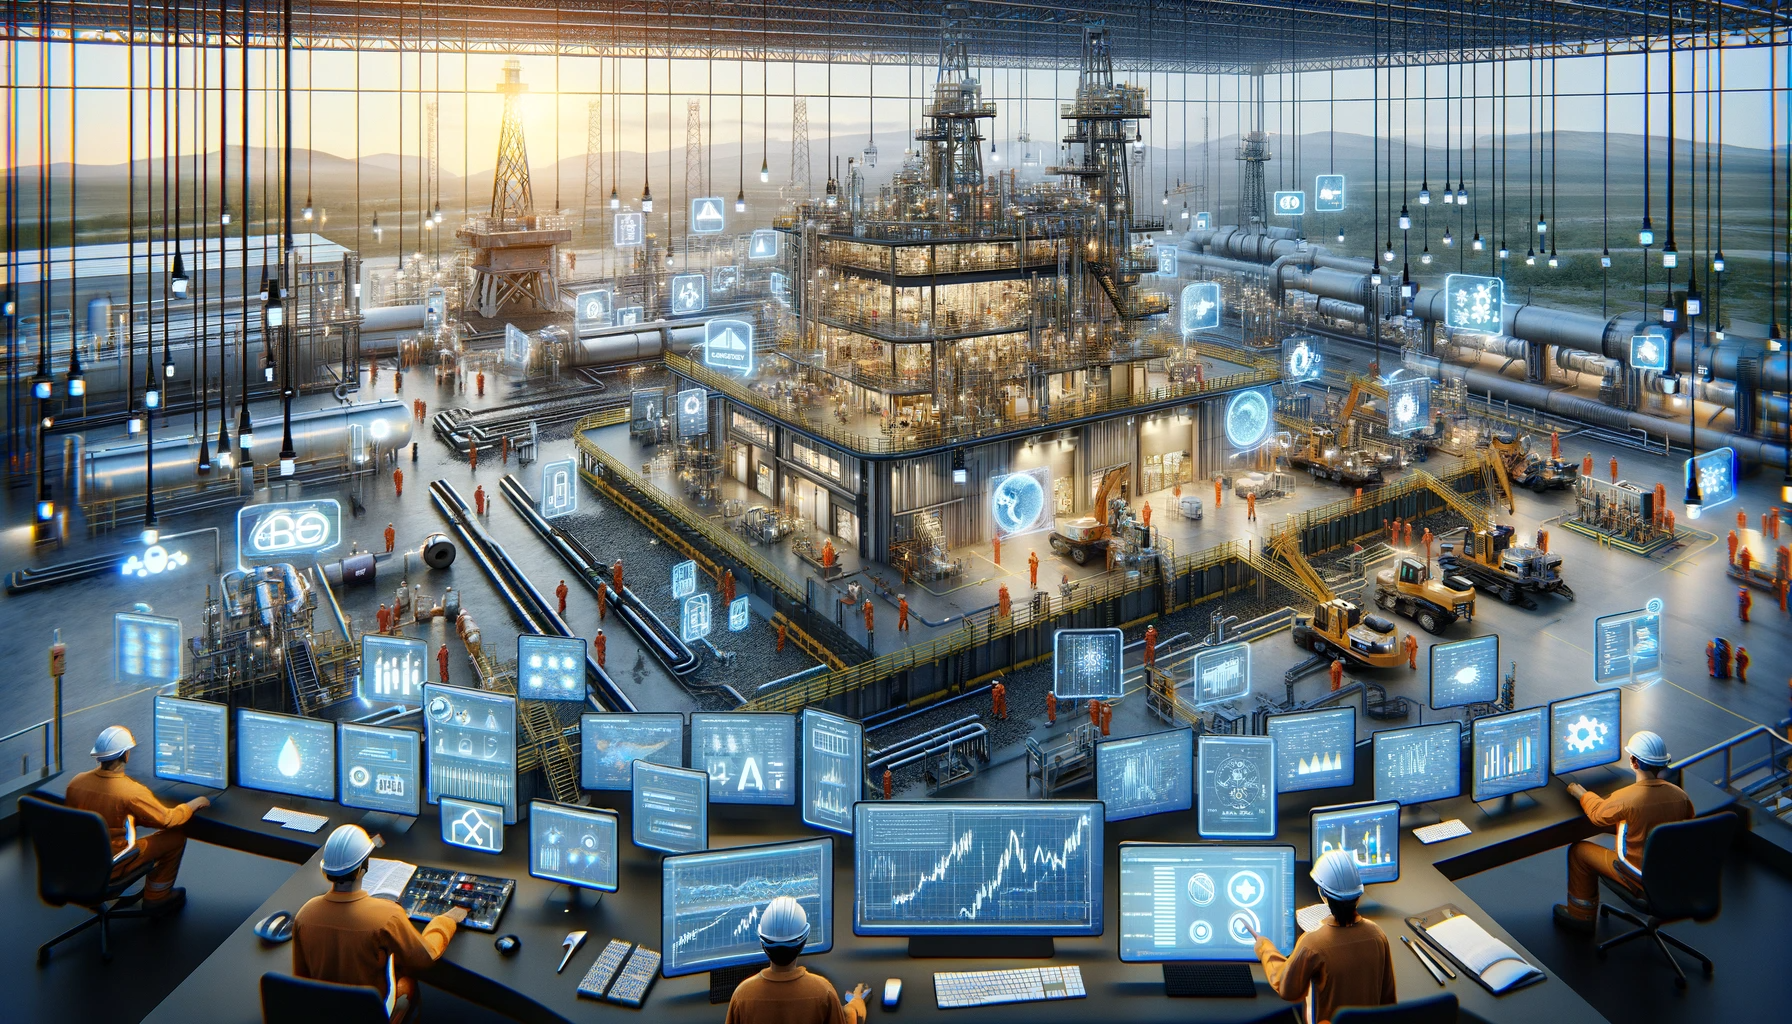 DALL·E 2024-01-03 17.30.15 - Visualize an advanced oil and gas facility where AI is being utilized to enhance operations. The scene shows a realistic depiction of an industrial se